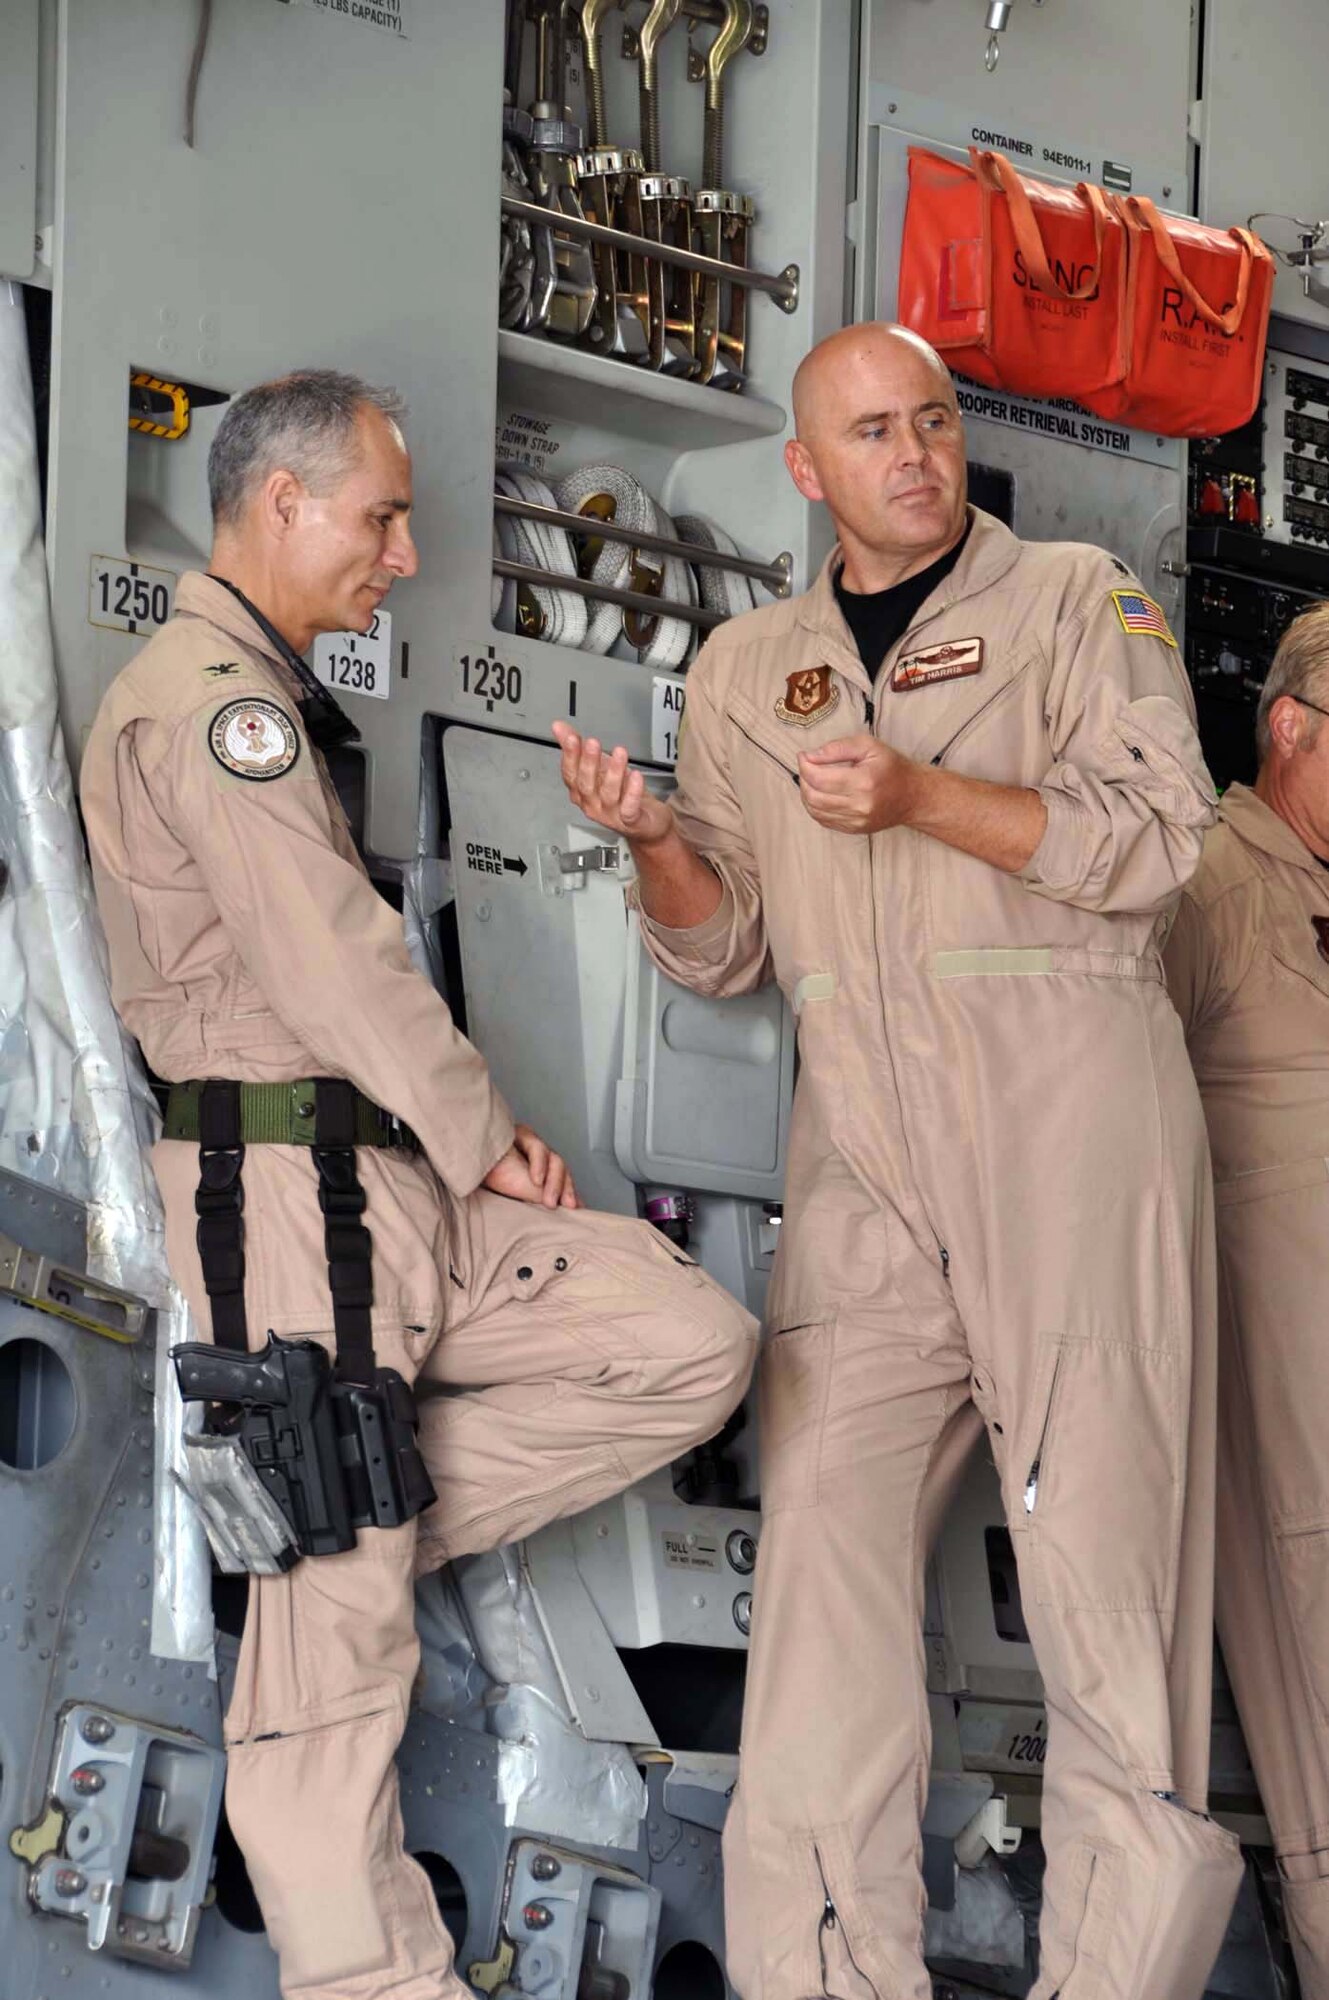 Lt. Col. Tim Harris, 729th Airlift Squadron pilot and aircraft commander, discusses the mission with deployed 452nd Air Mobility Wing commander, Col. Udo McGregor, upon Harris' arrival at Kabul International Airport, Afghanistan, October 4, 2011.  Team March transported cargo, donated by Women of Faith in Redlands, Calif., to the war-torn nation through the Denton Amendment program, a U.S. government program that allows humanitarian supplies to be shipped on military aircraft free of charge on a space available basis. (U.S. Air Force photo/Master Sgt. Linda Welz)